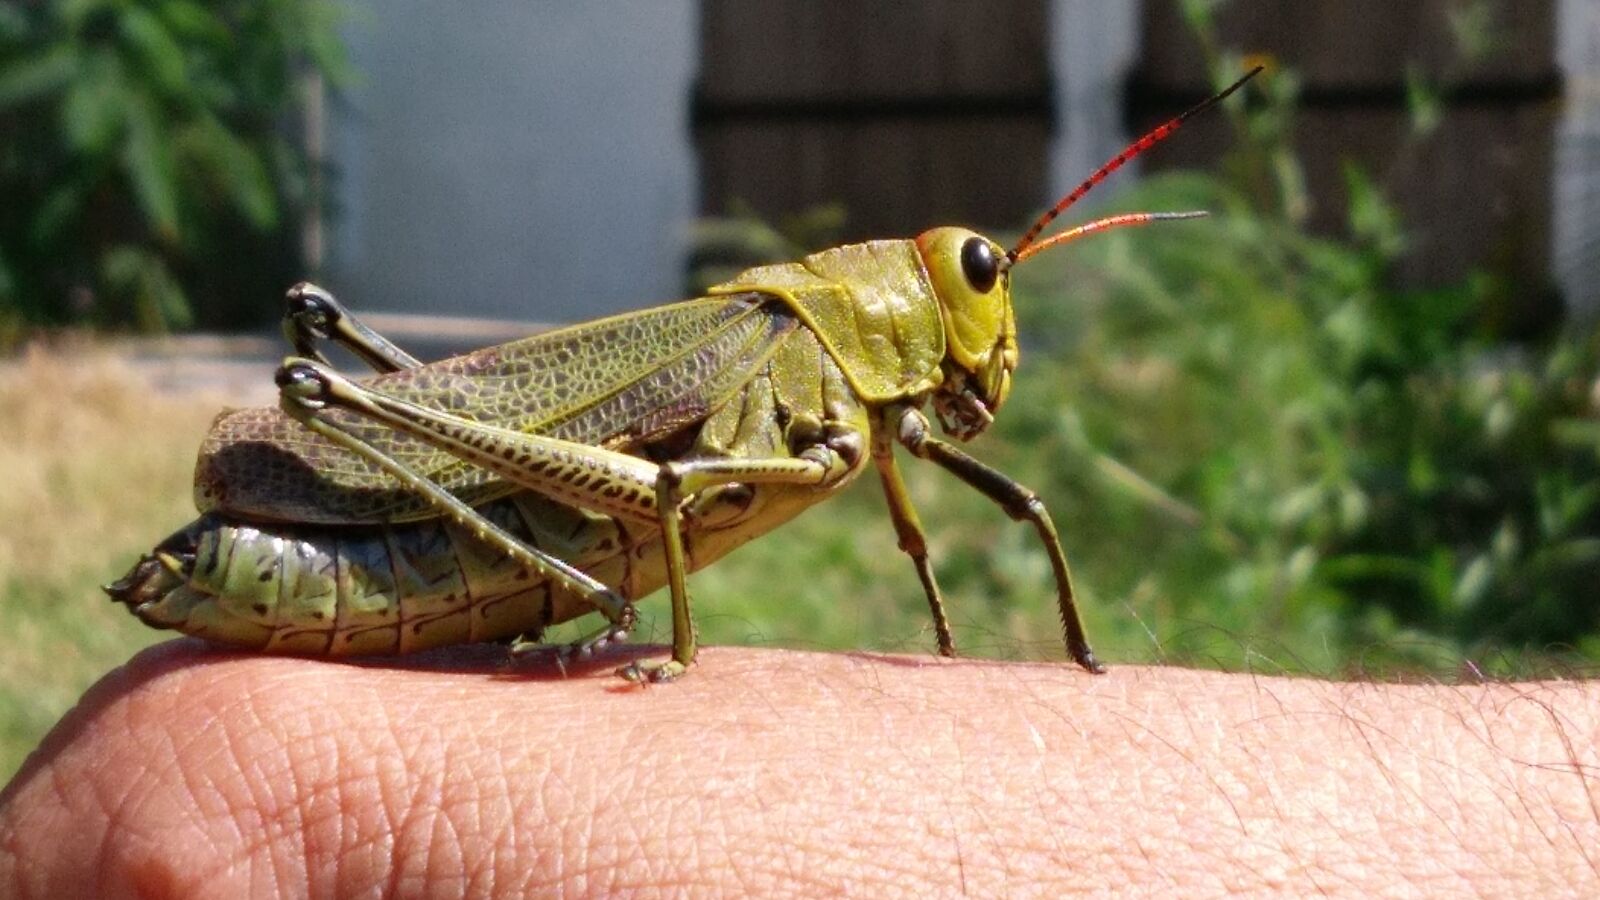 HTC ONE A9 sample photo. Bug, grasshopper, insect photography